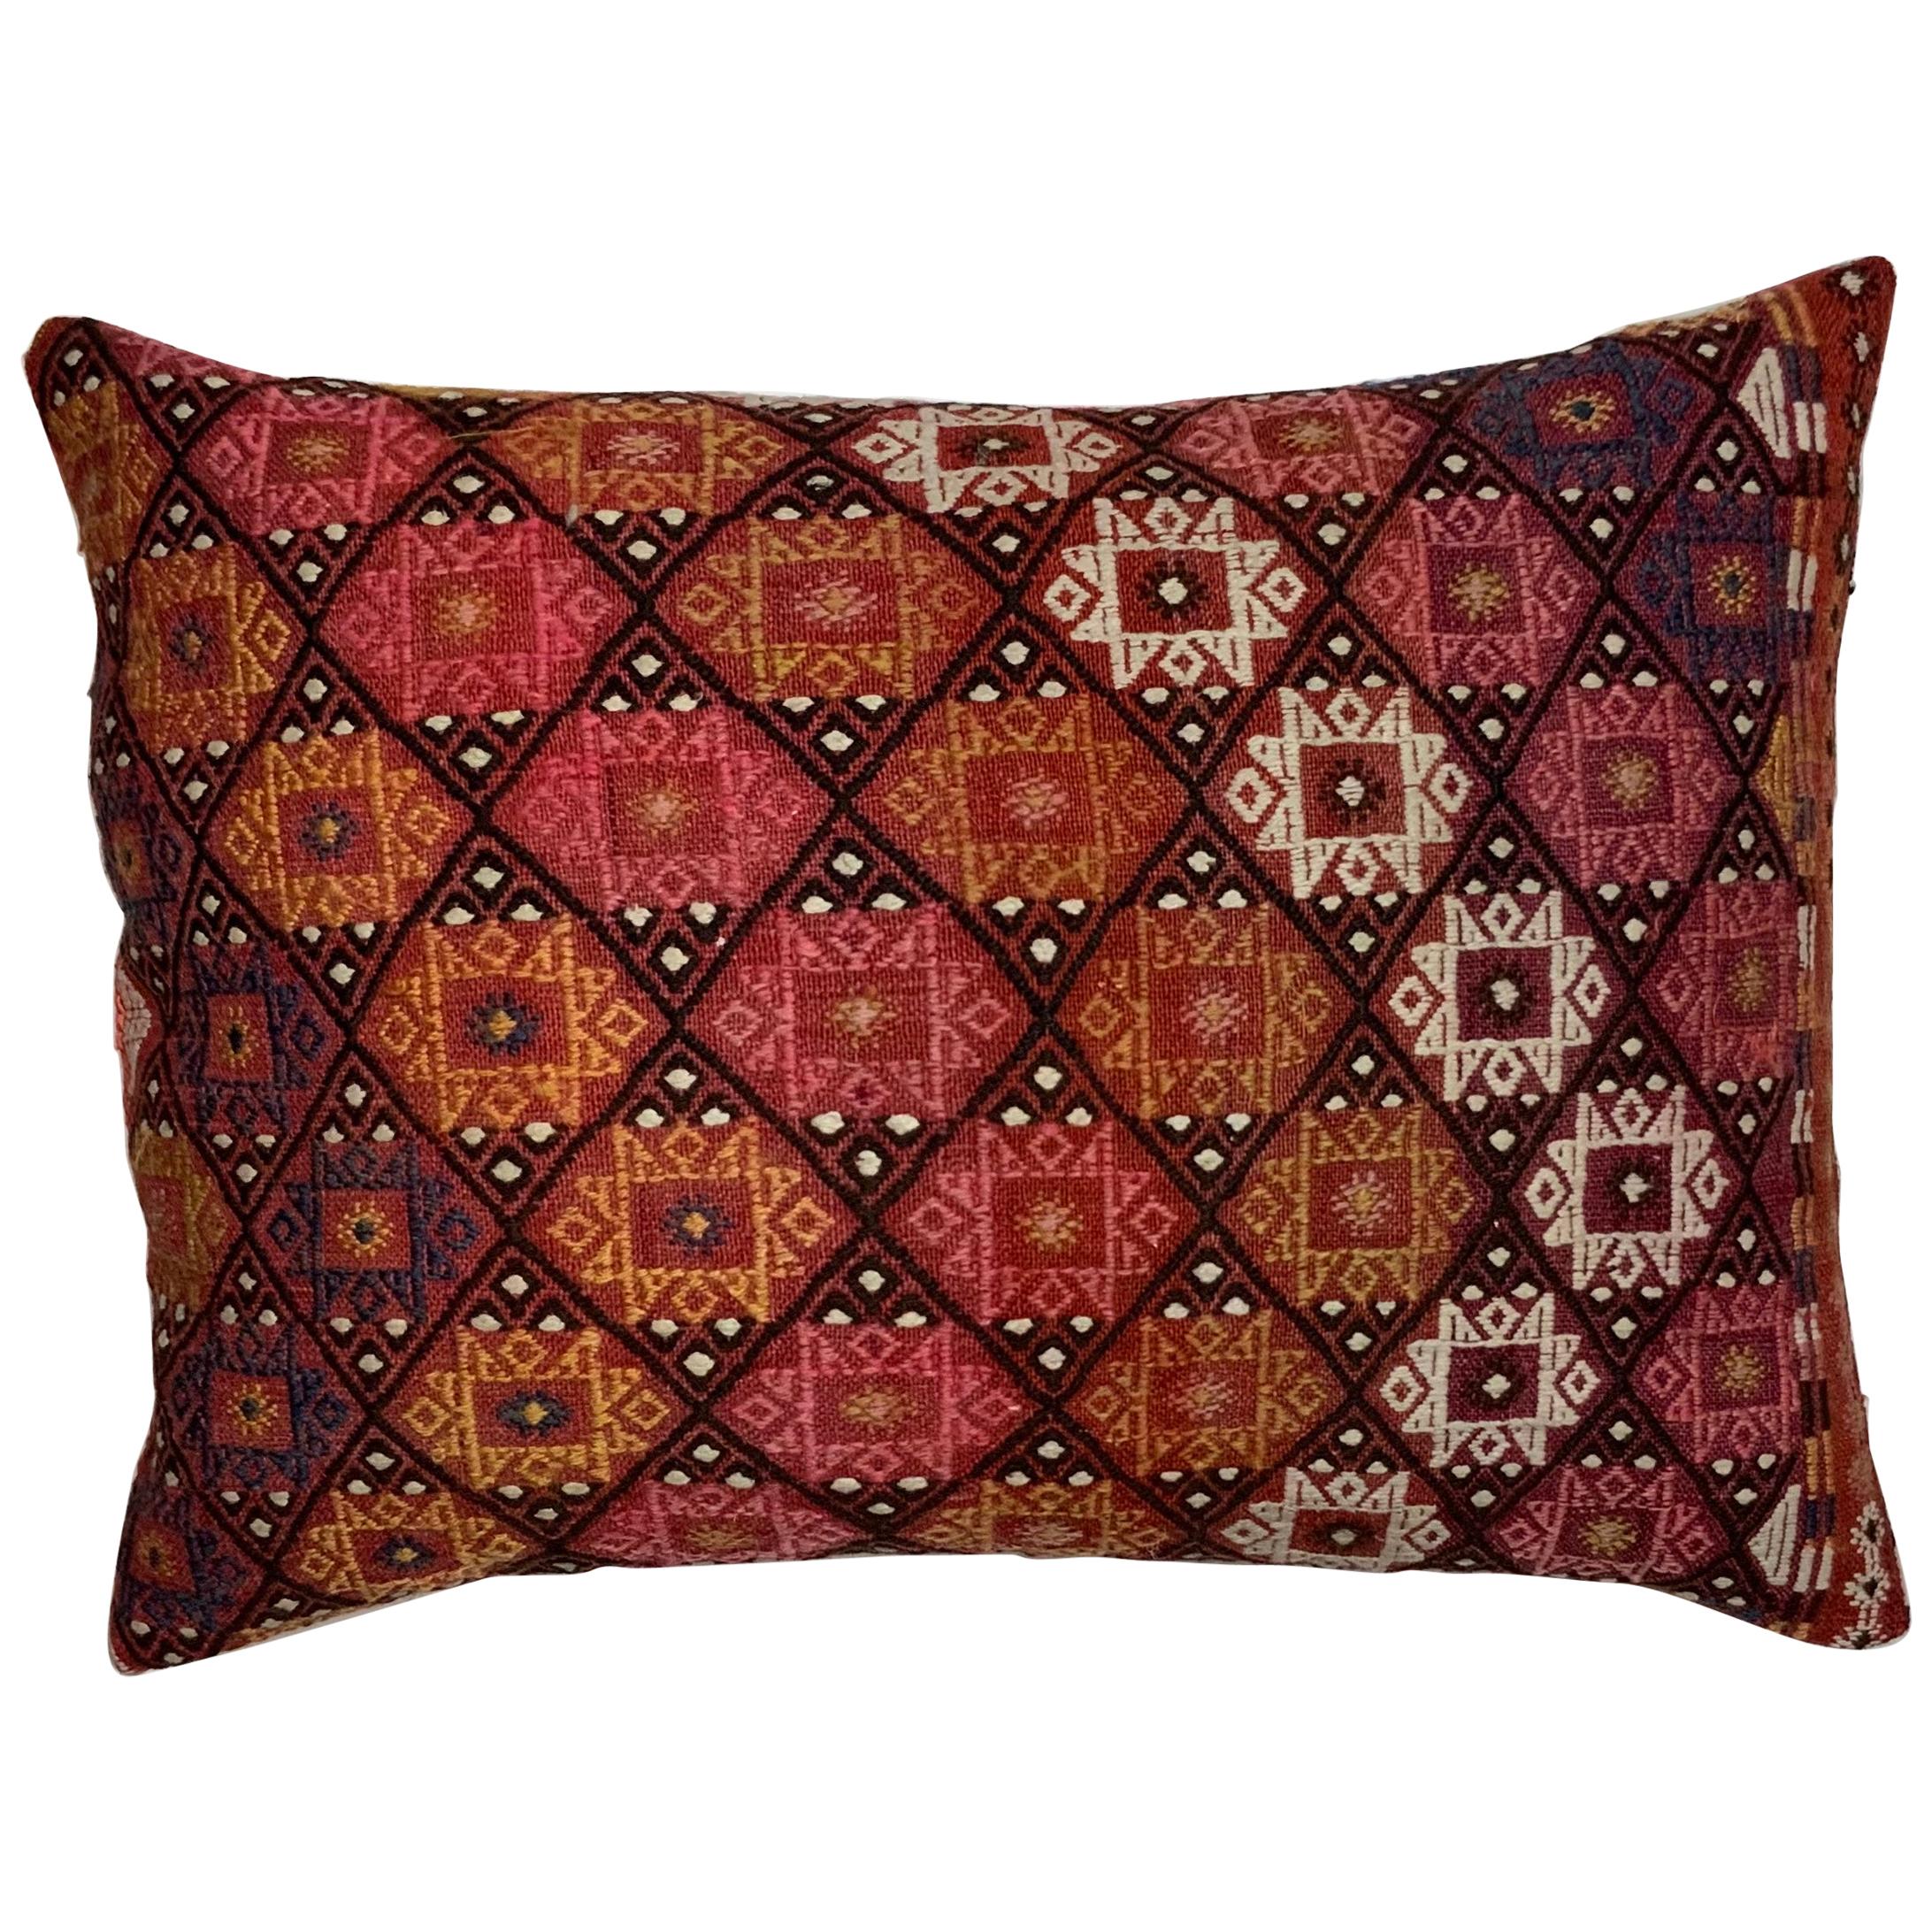 Single Vintage Hand Embroidery Pillow For Sale